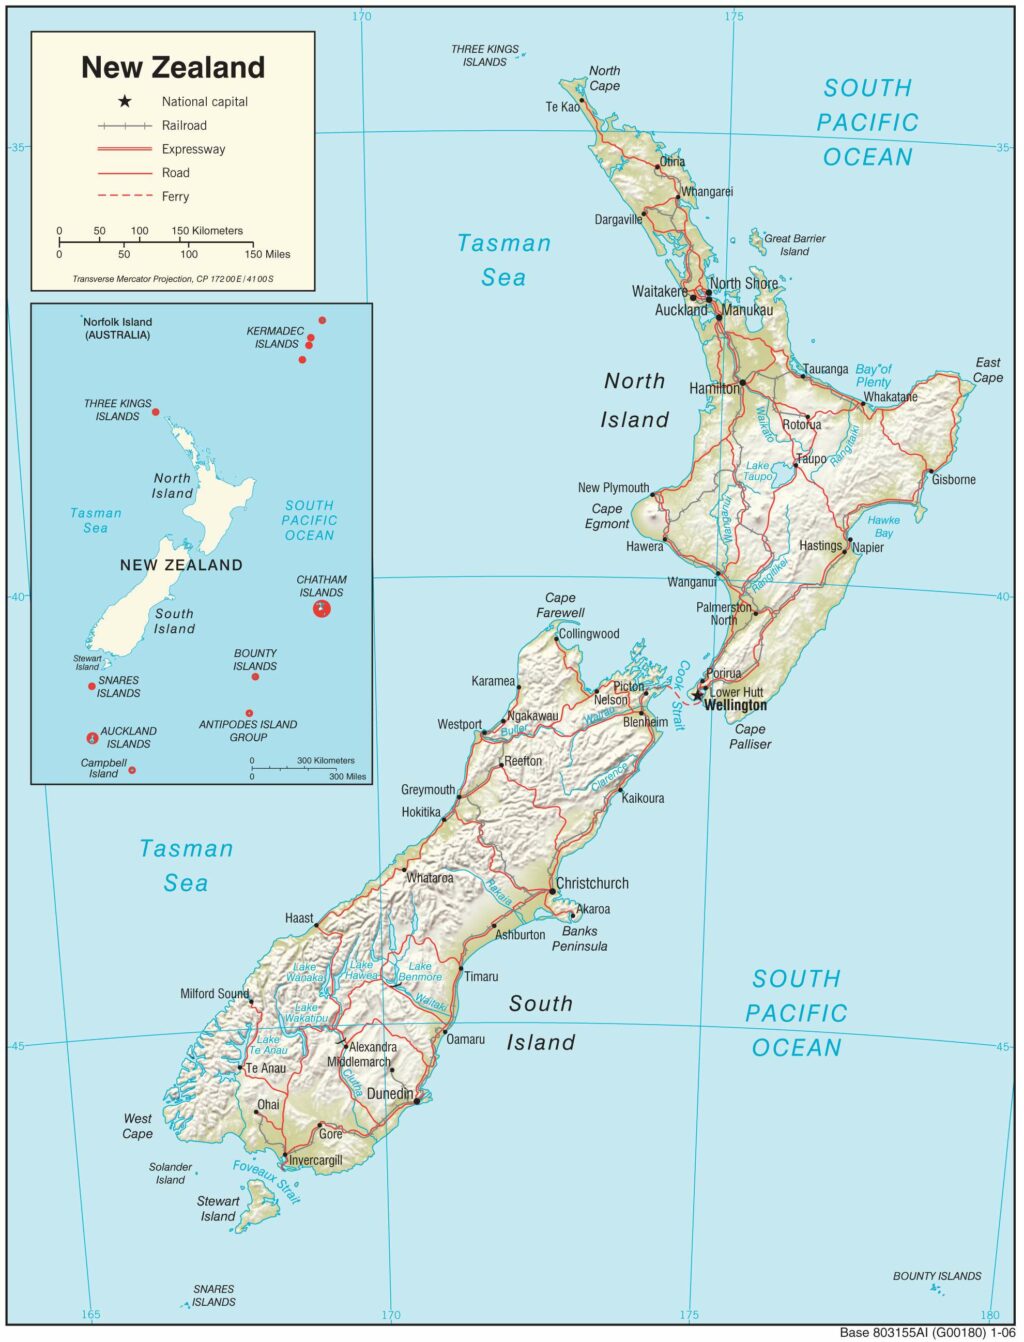 New Zealand physiography map.